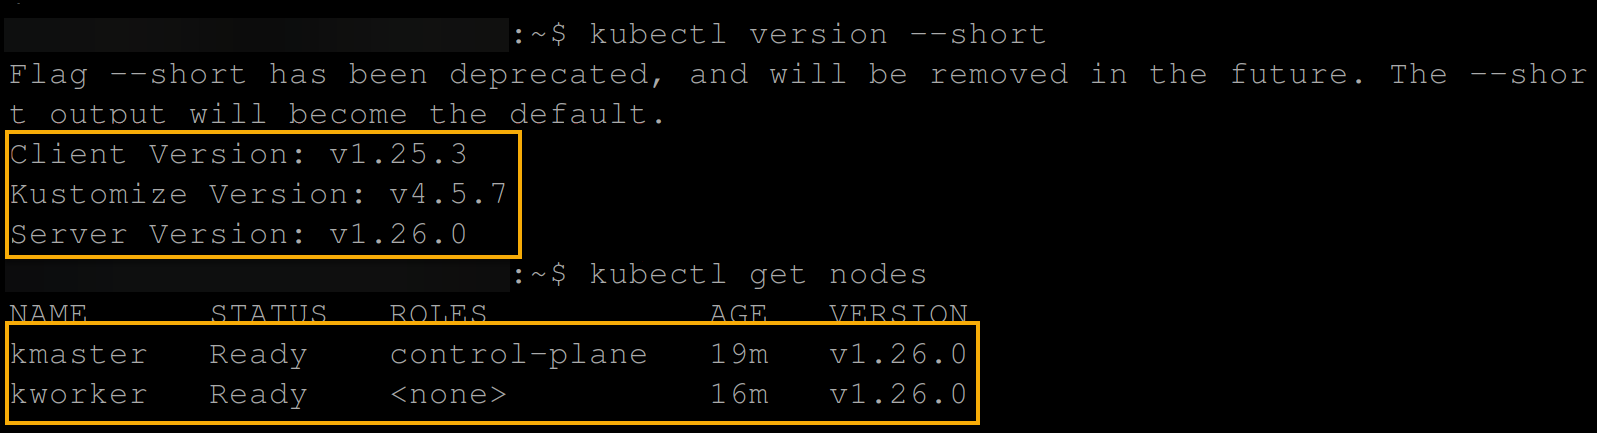 Verifying the kubectl version and retrieving nodes